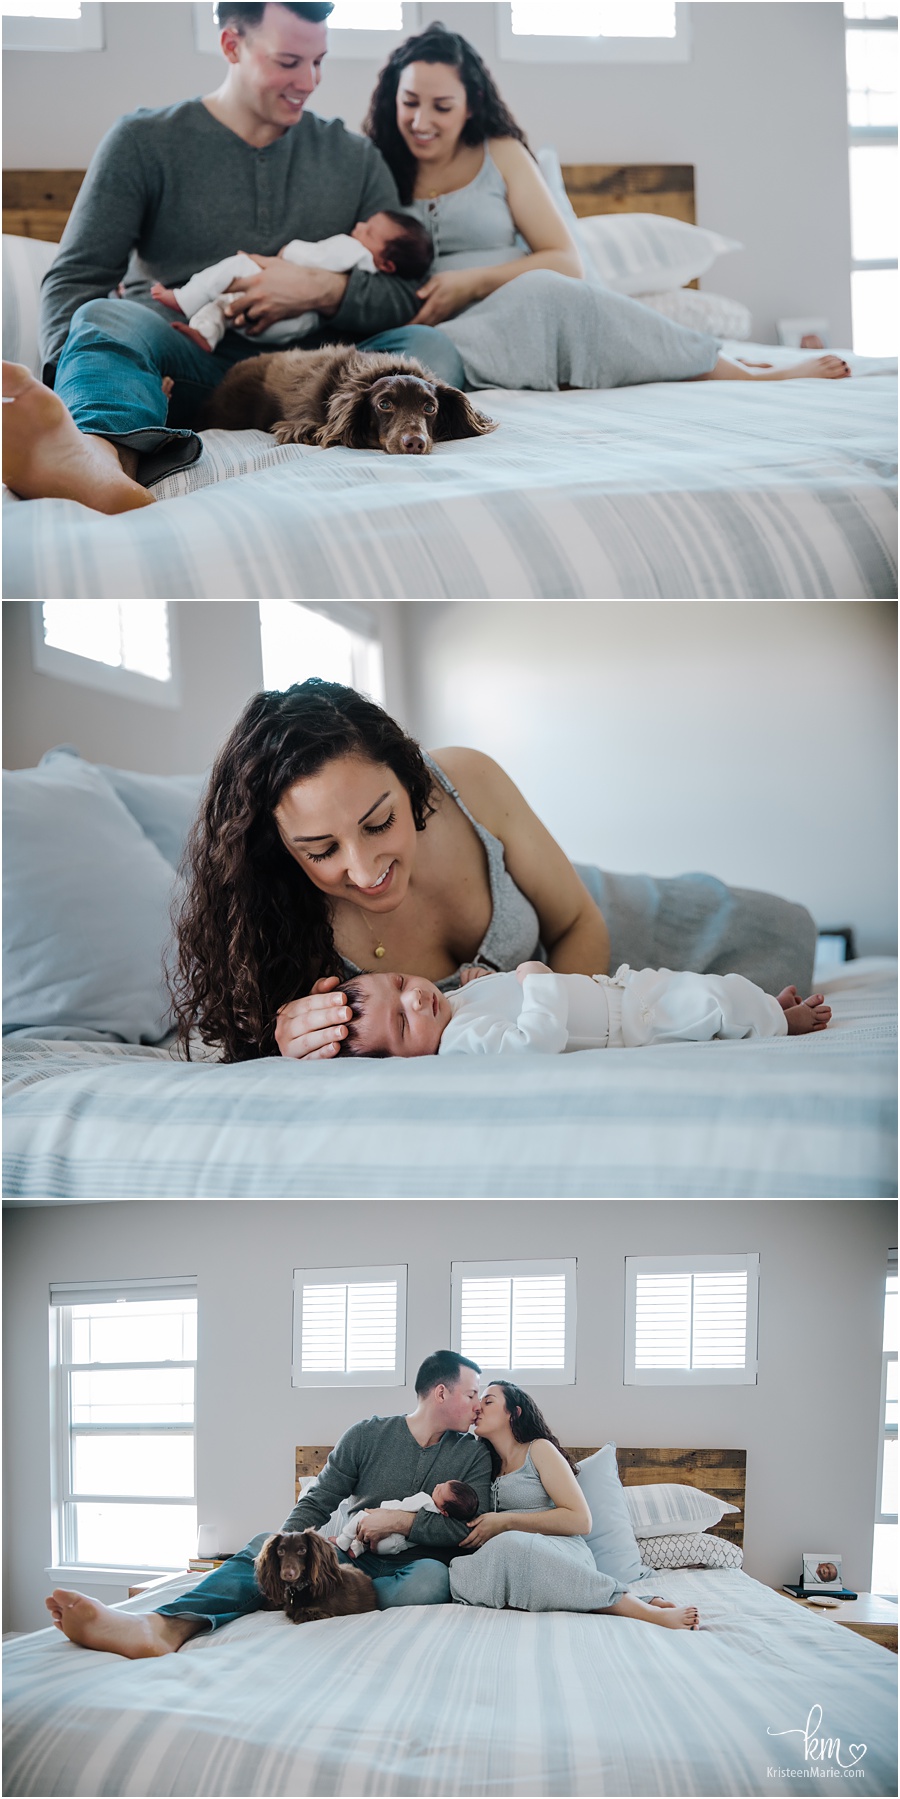 cuddling on bed with newborn baby - in-home lifestyle newborn photography